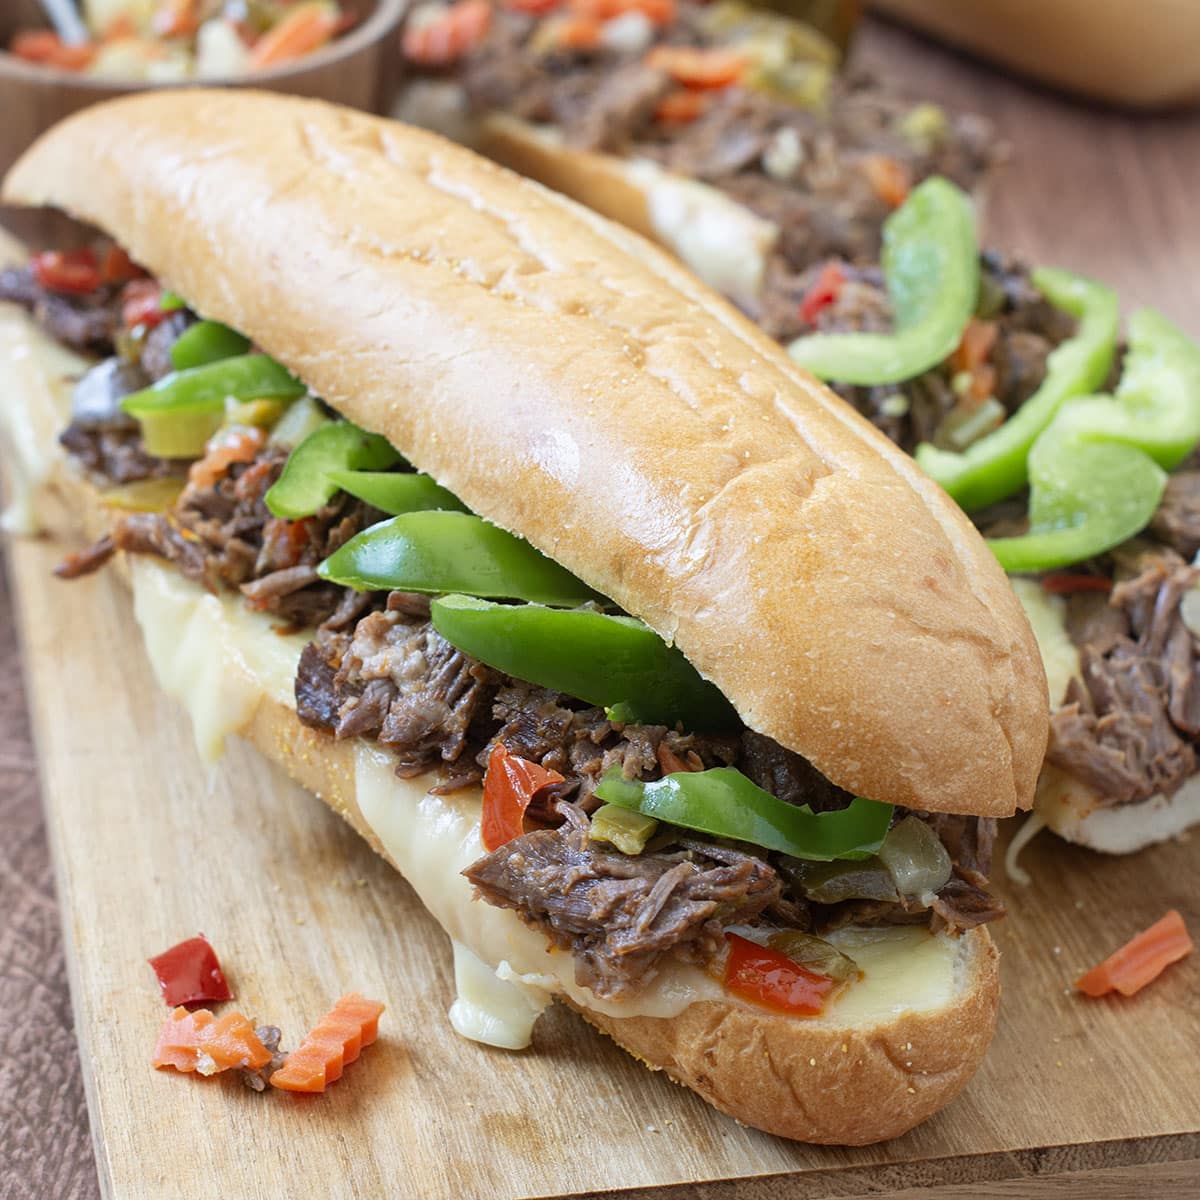 Shredded Beef Sandwiches with green peppers and melted cheese.